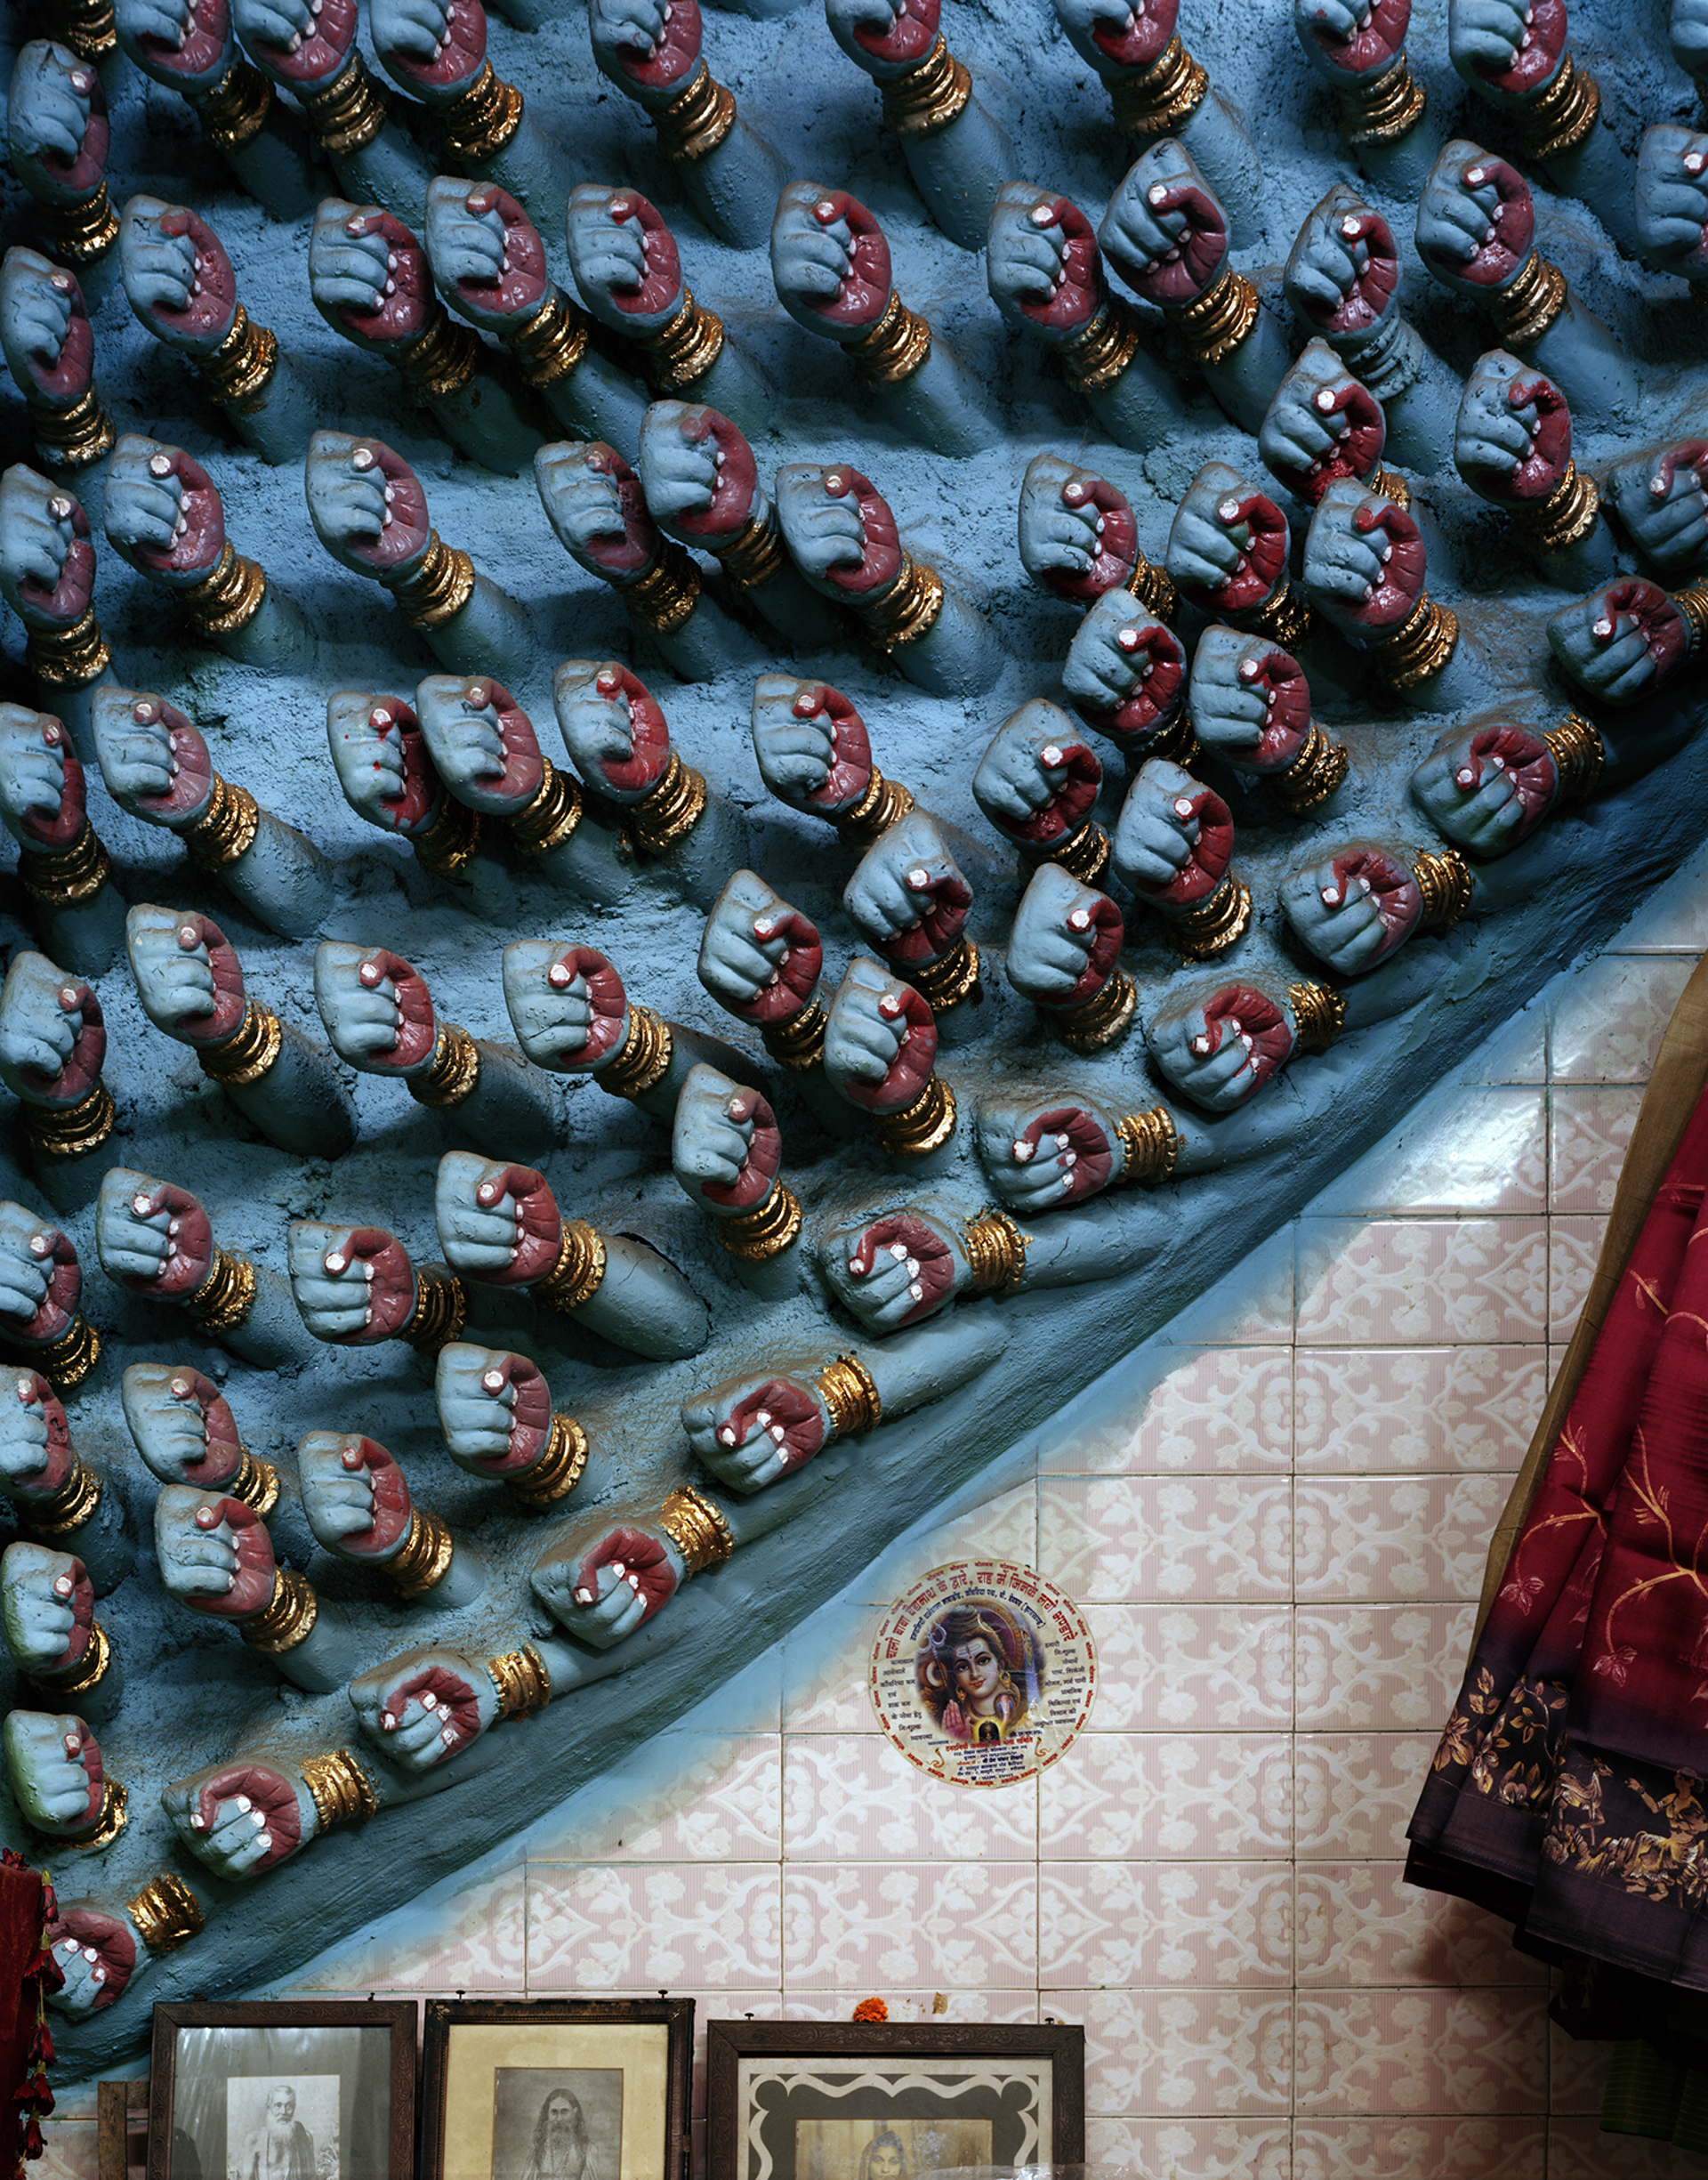 Fists of the Goddess Kali, Destroyer of Evil, Kali Temple, Howrah by Laura McPhee